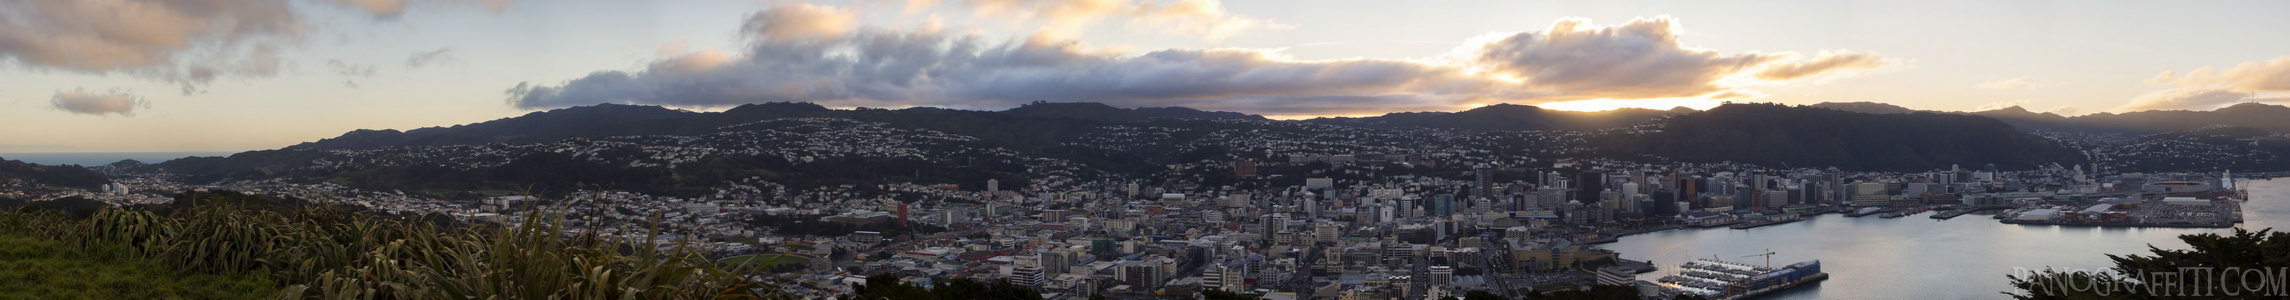 Wellington City and Harbour Just Before Sunset - Mount Victoria, Wellington, New Zealand